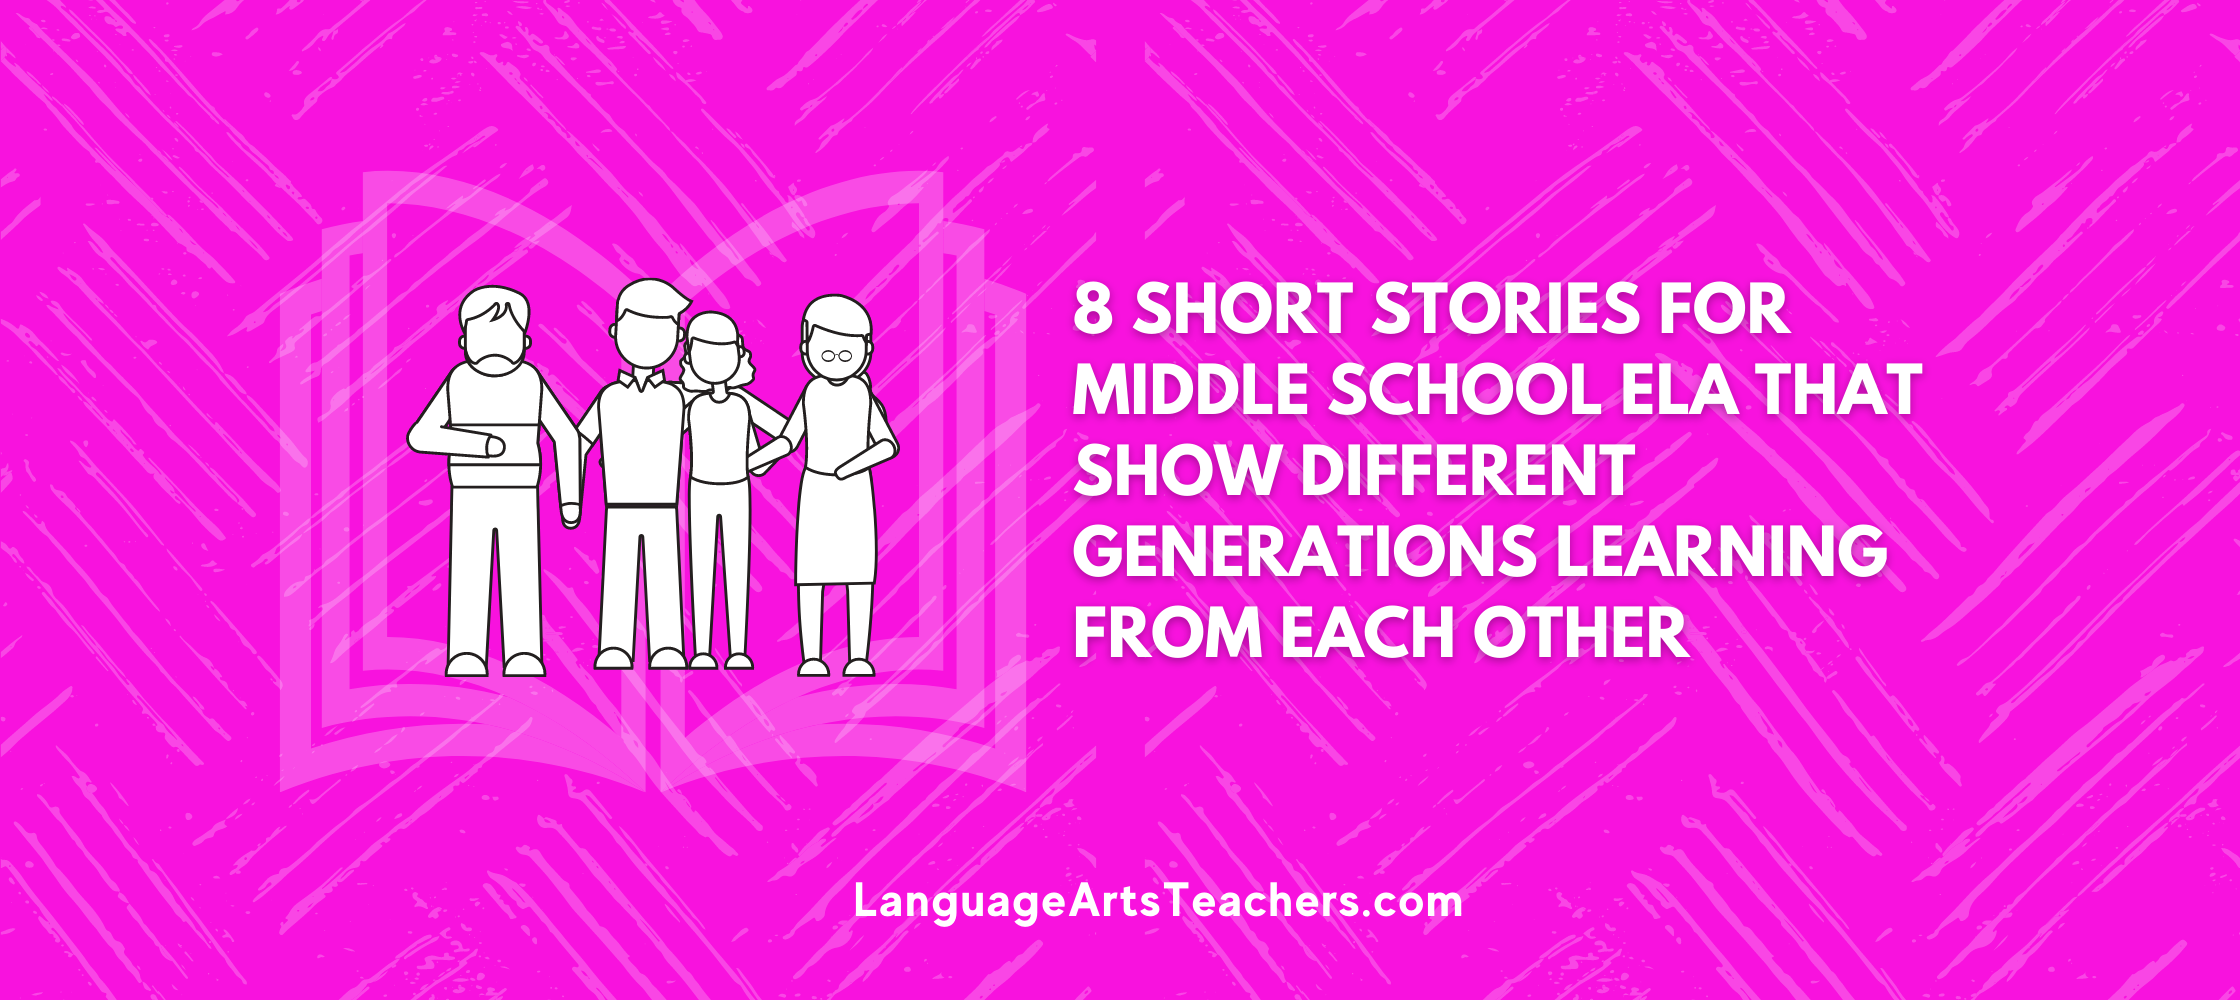 8 Short Stories for Middle School ELA that show different generations learning from each other